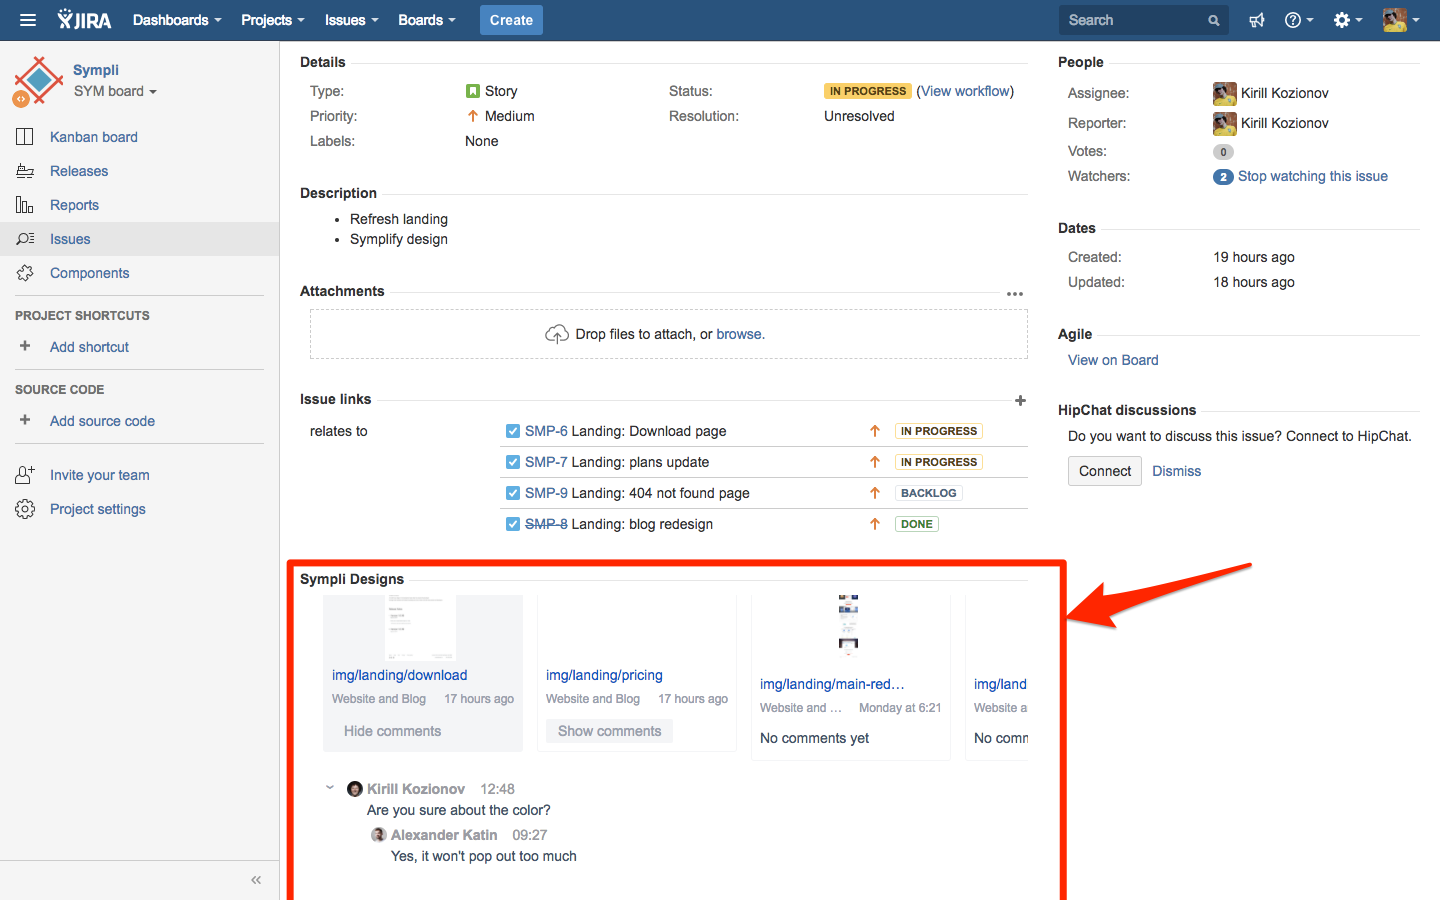 Viewing Sympli comments in Jira